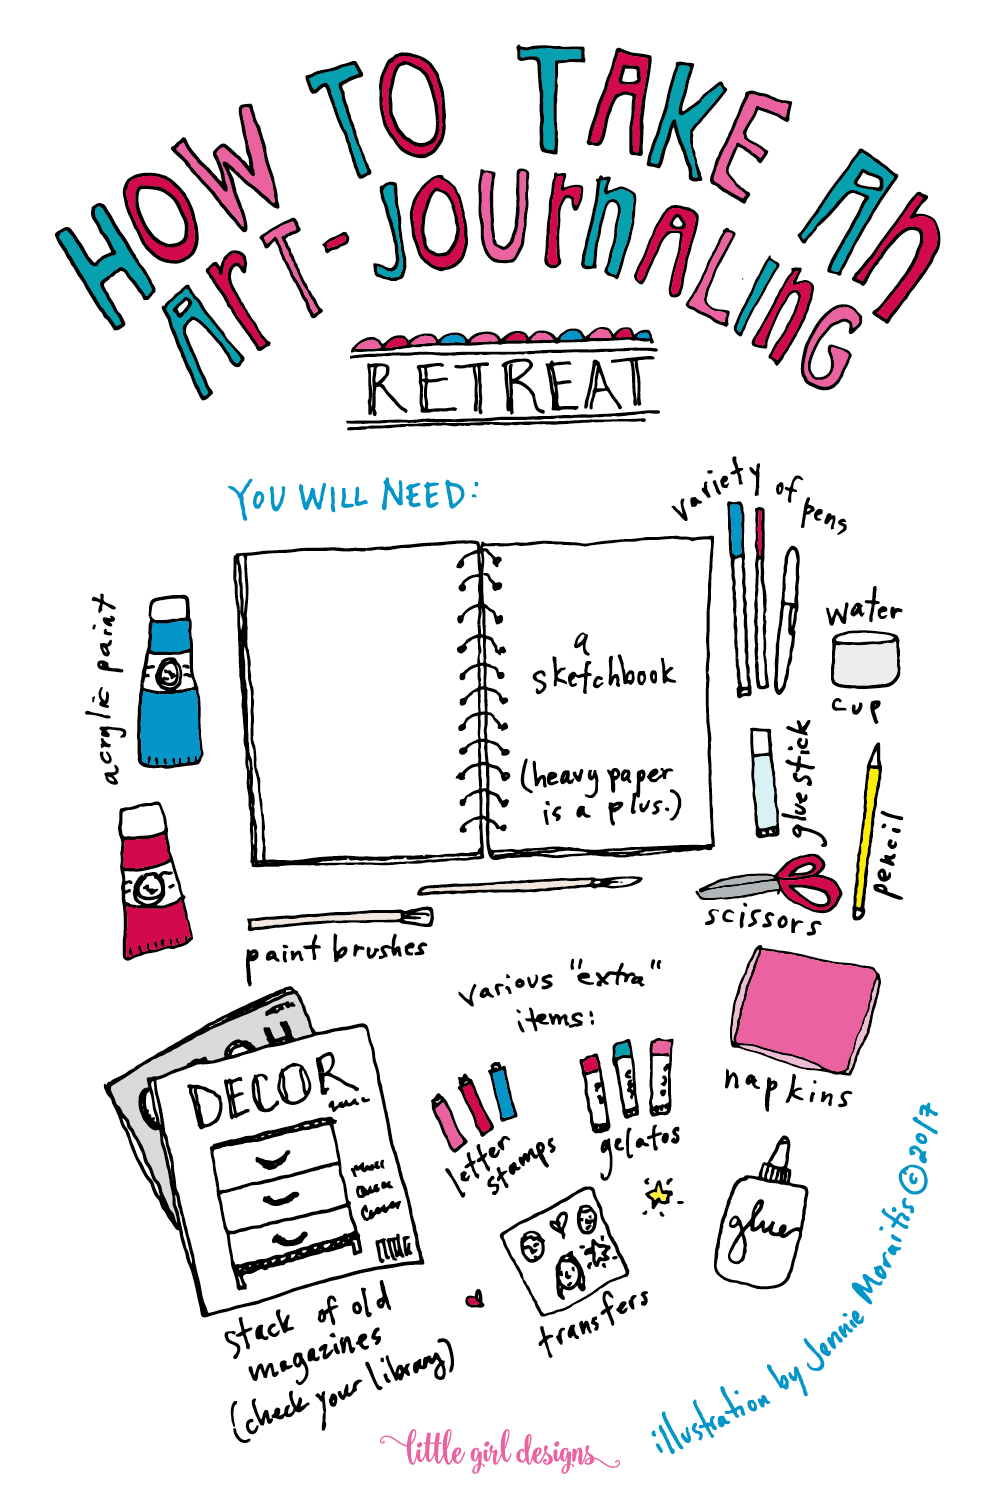 Create Your Own Artist Retreat with Art Journaling